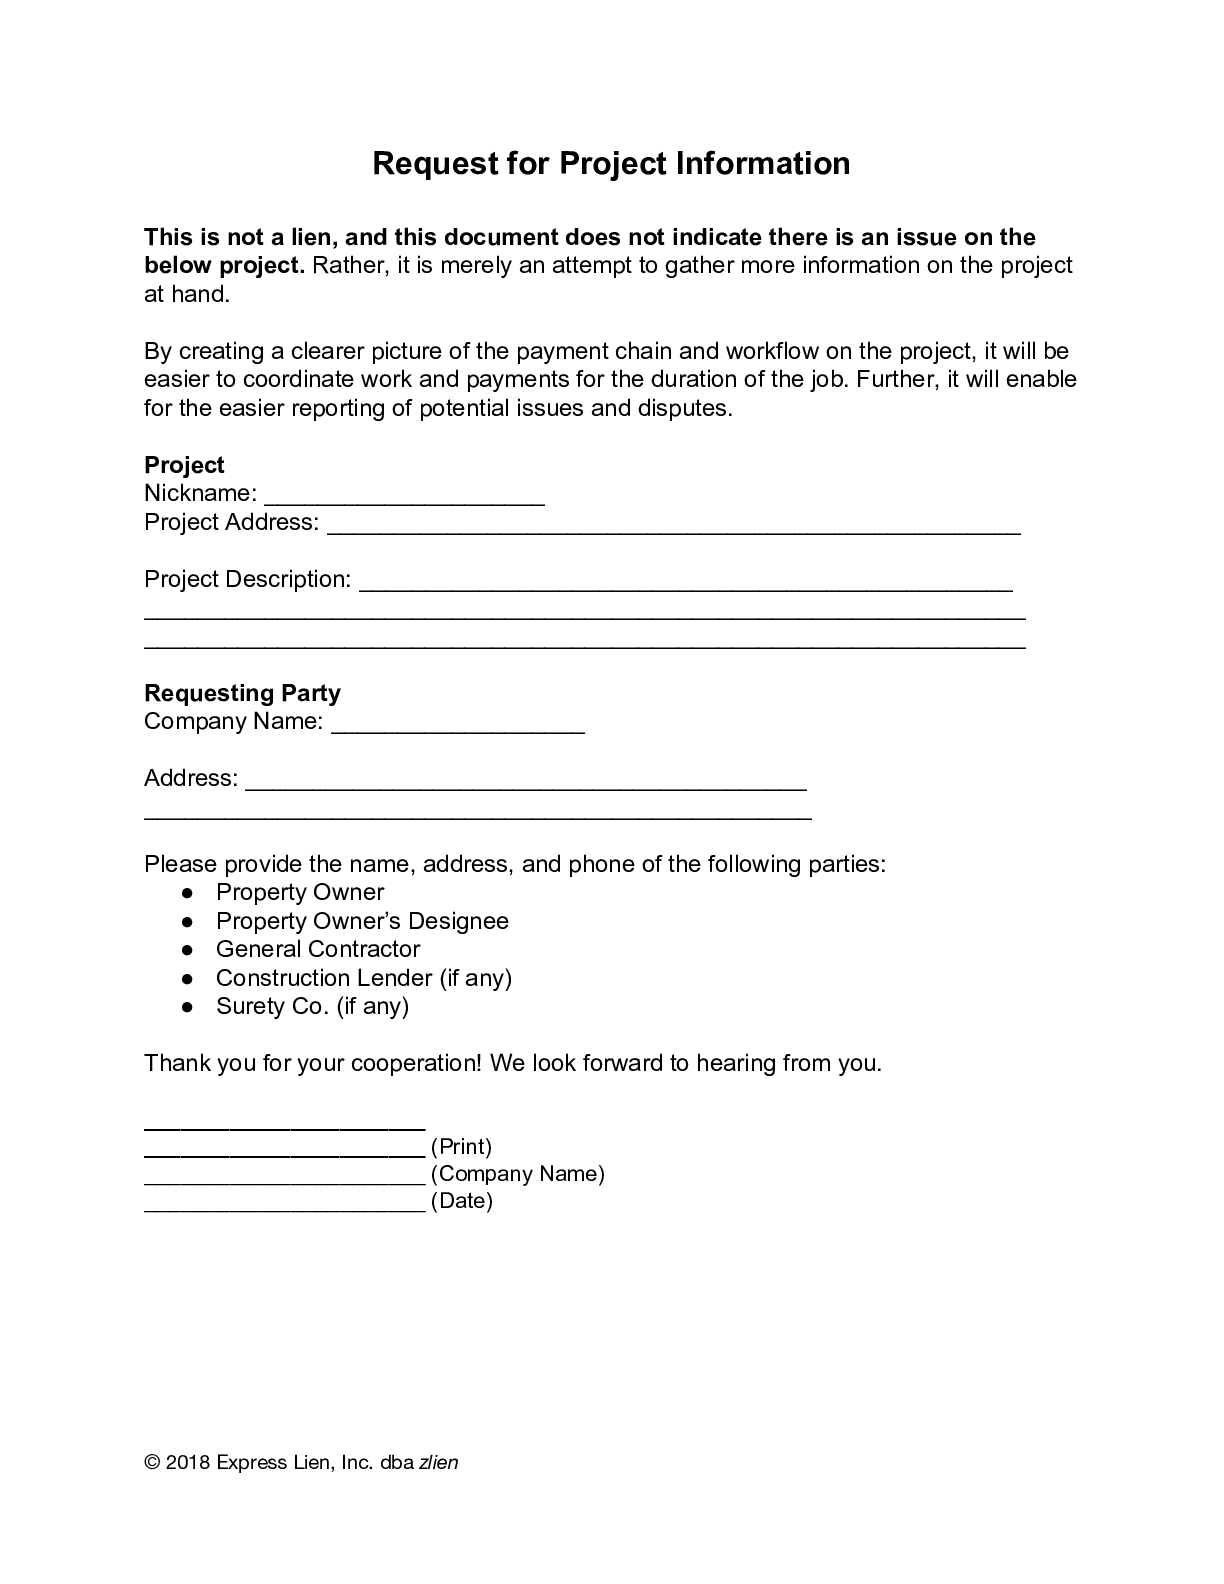 Request for Project Information Form